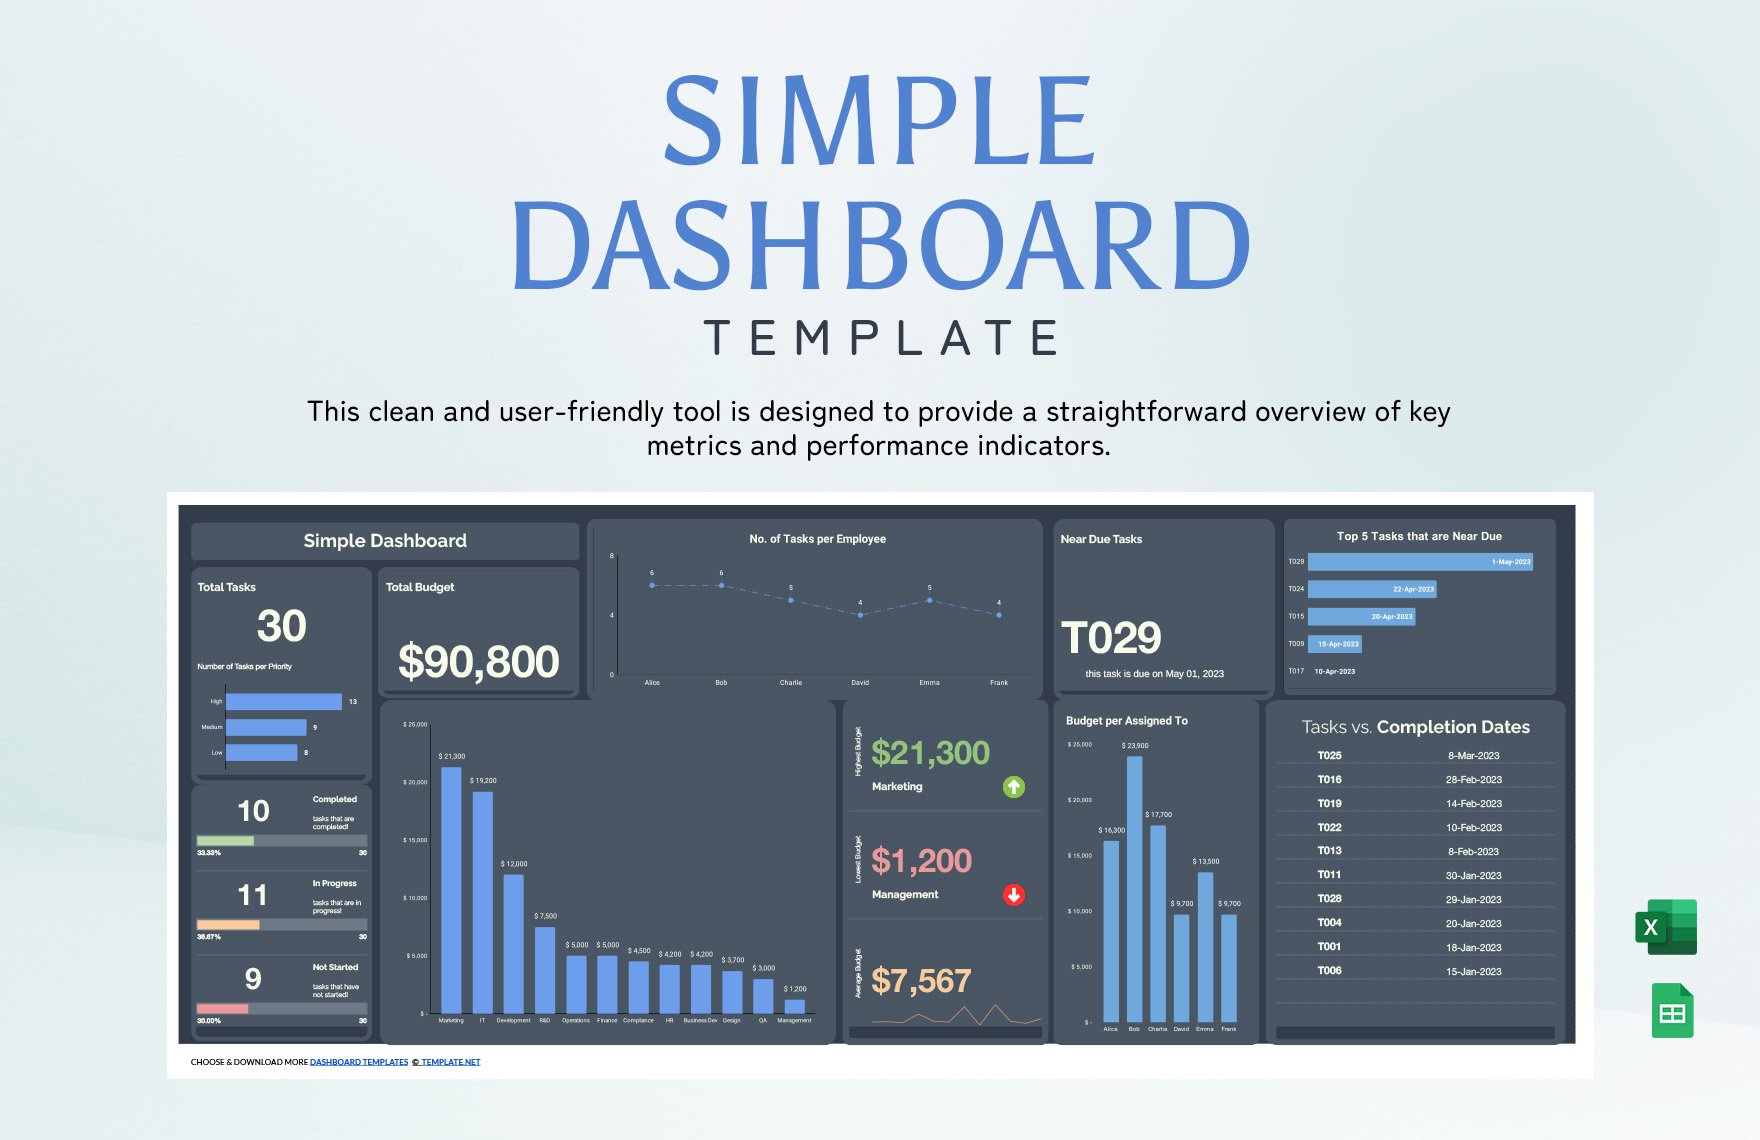 Free Simple Dashboard Template in Excel, Google Sheets